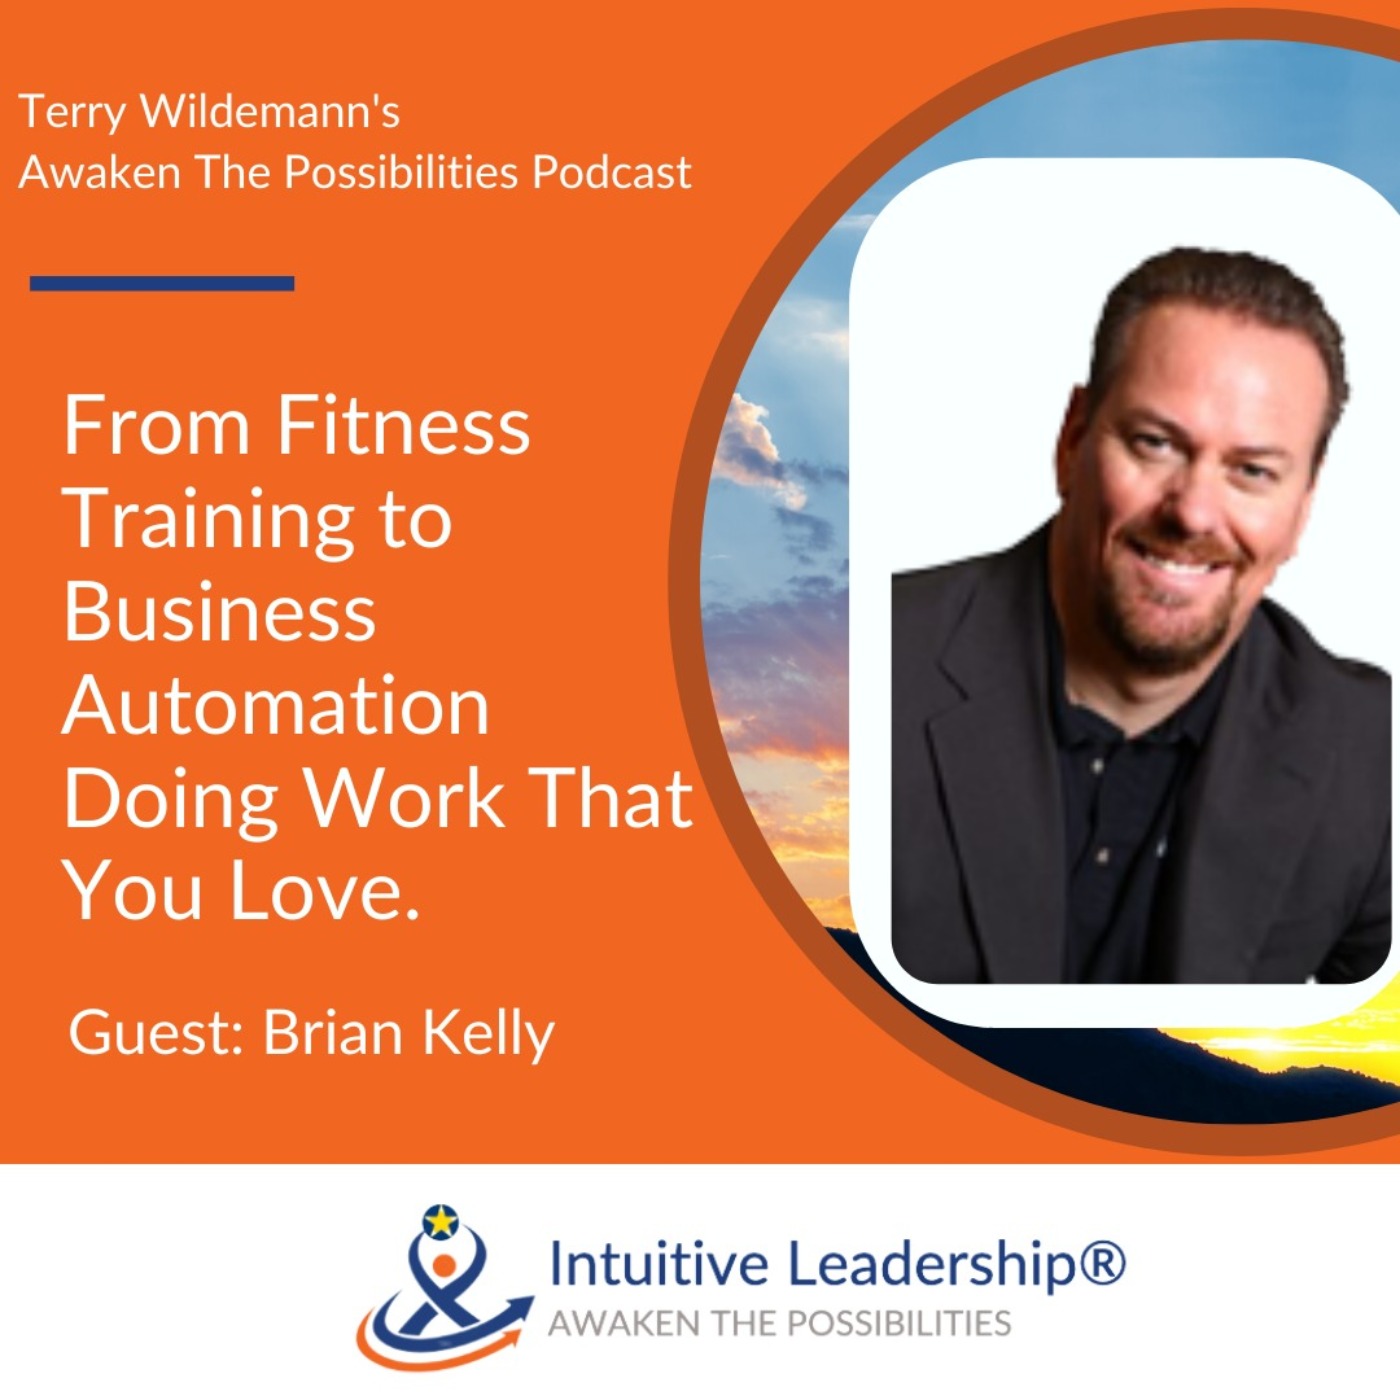 Awaken The Possibilities: From Fitness Training to Business Automation Doing Work That You Love